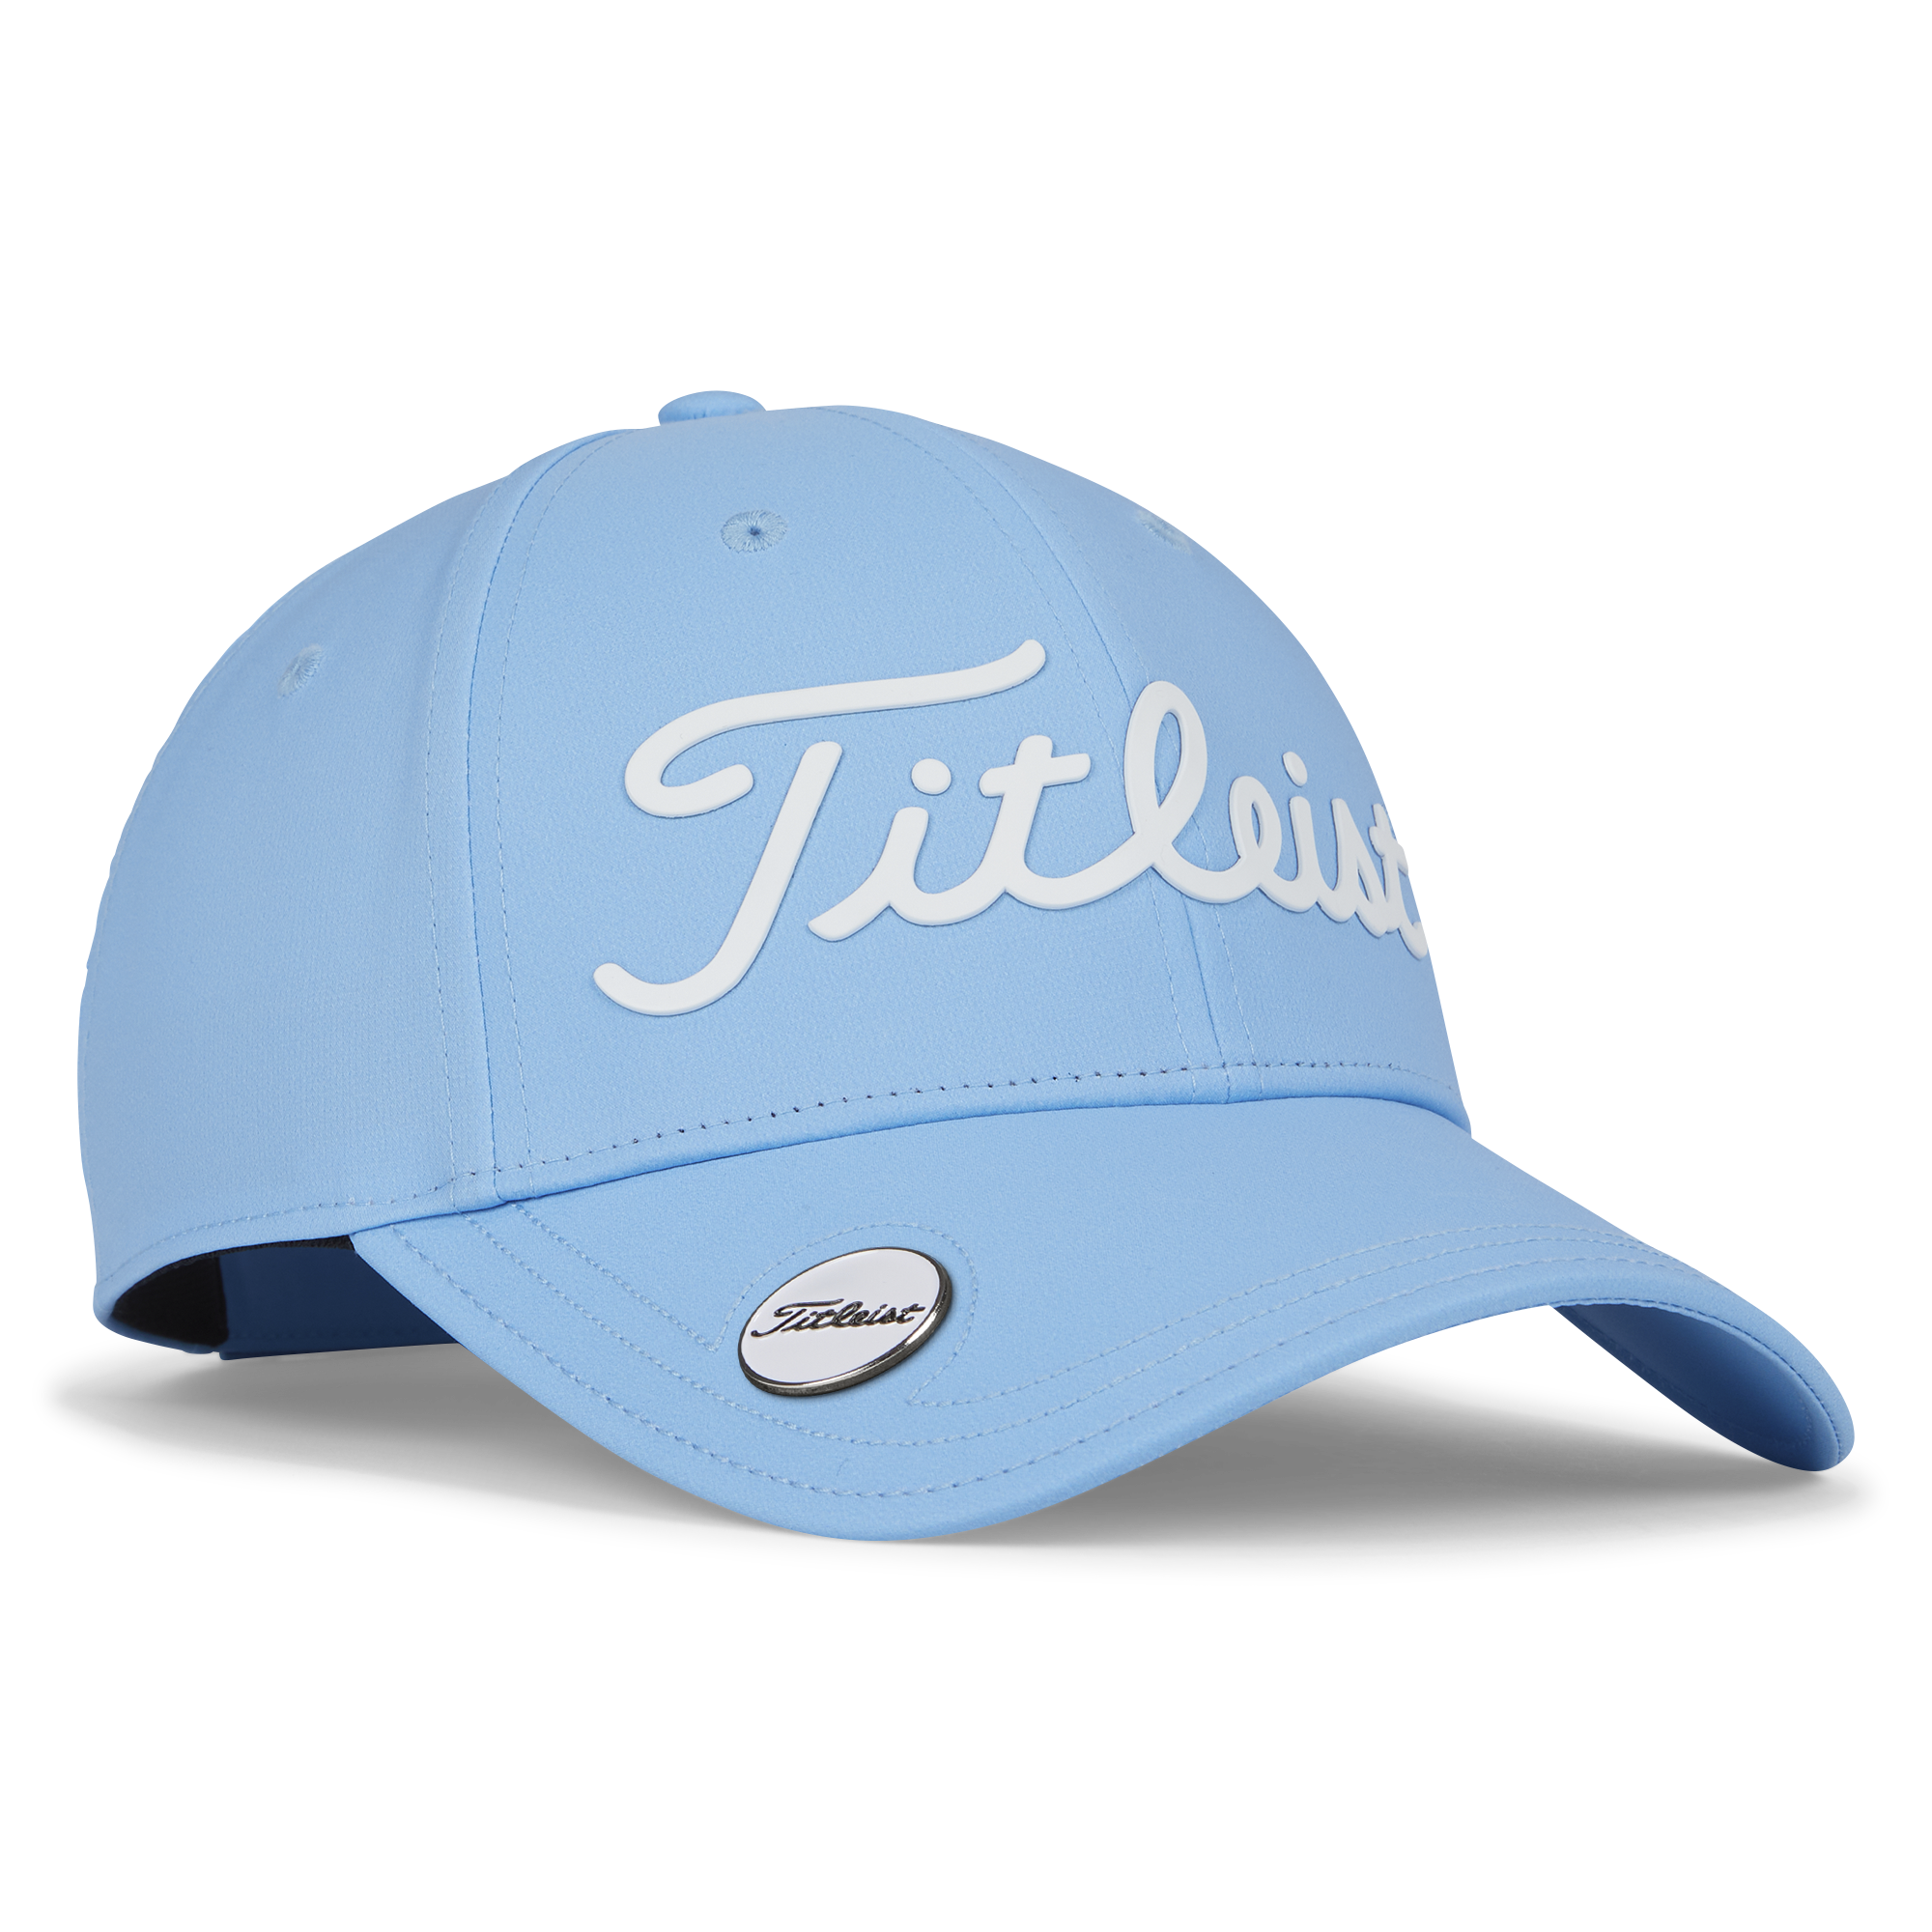 Titleist Official Womens Players Performance Ball Marker in Reef Blue/White